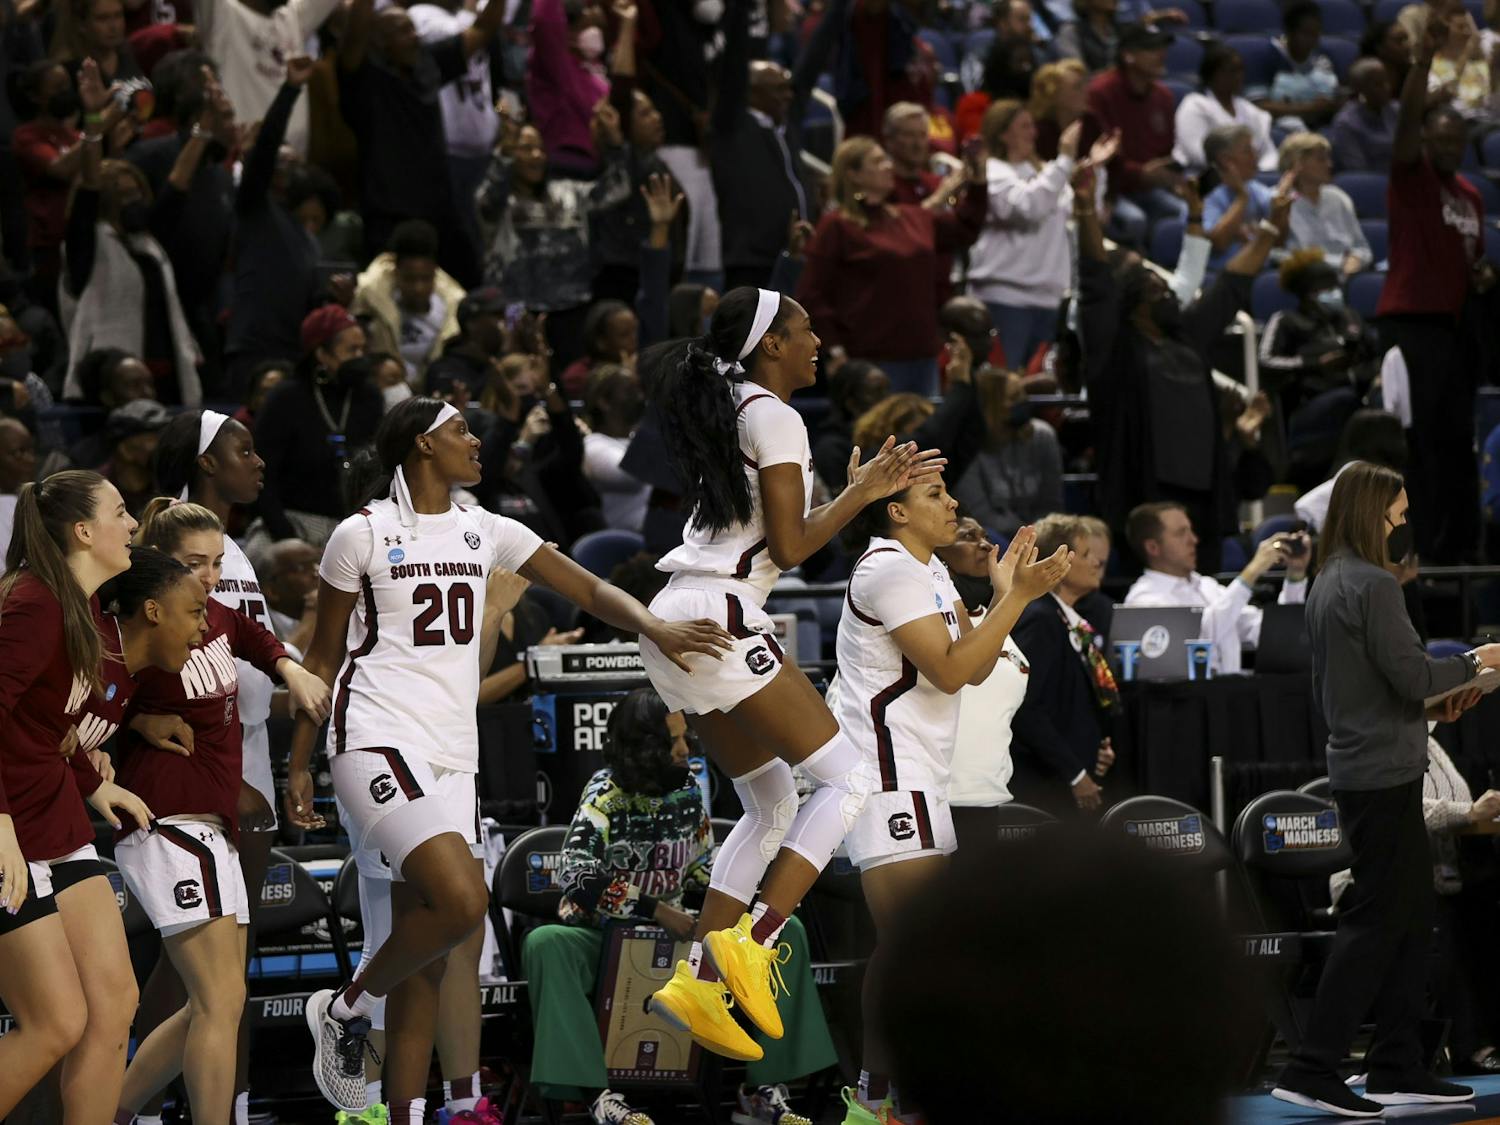 South Carolina Gamecocks celebrate advancing to the Elite Eight after their 69-61 victory over the North Carolina Tarheels on March 25, 2022.